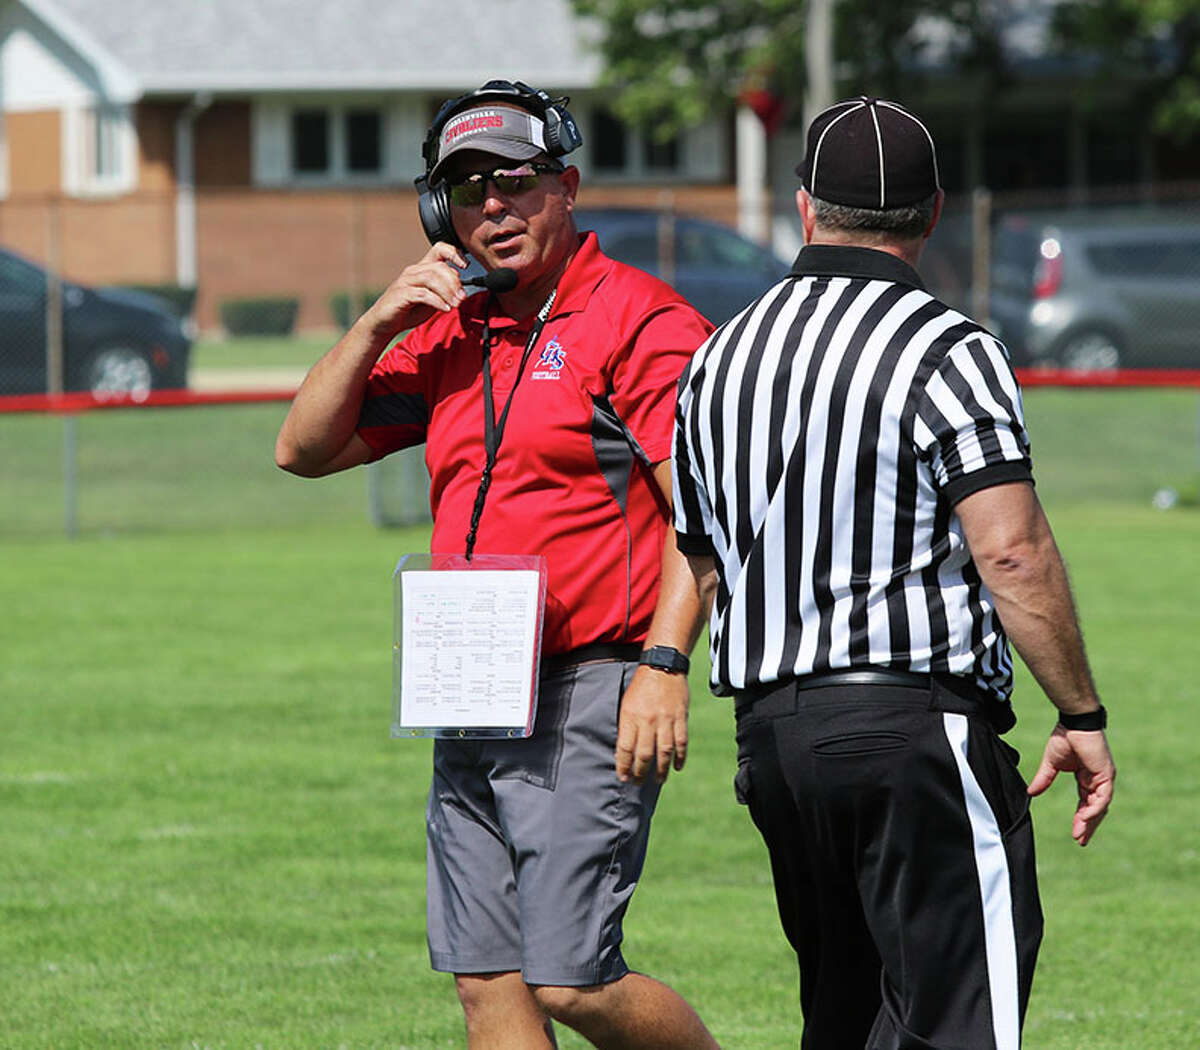 Carlinville coach Chad Easterday (left) has a word with an official during last season's Week 1 win at Gibson City. Easterday begins his 15th season having never missed the playoffs while posting a 112-39 record.